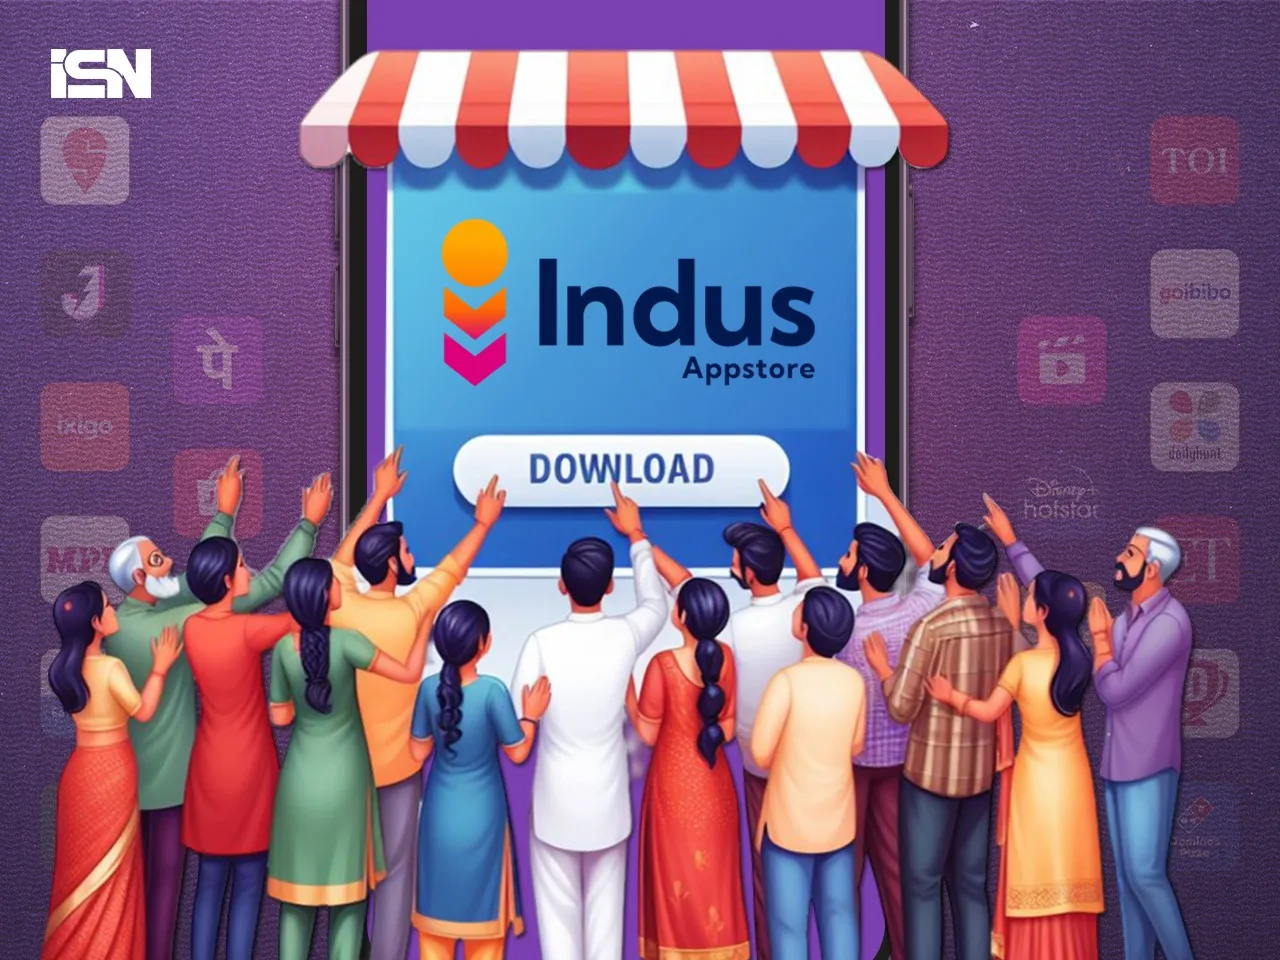 PhonePe's Indus Appstore crosses over 1 million installations within just a month of its launch